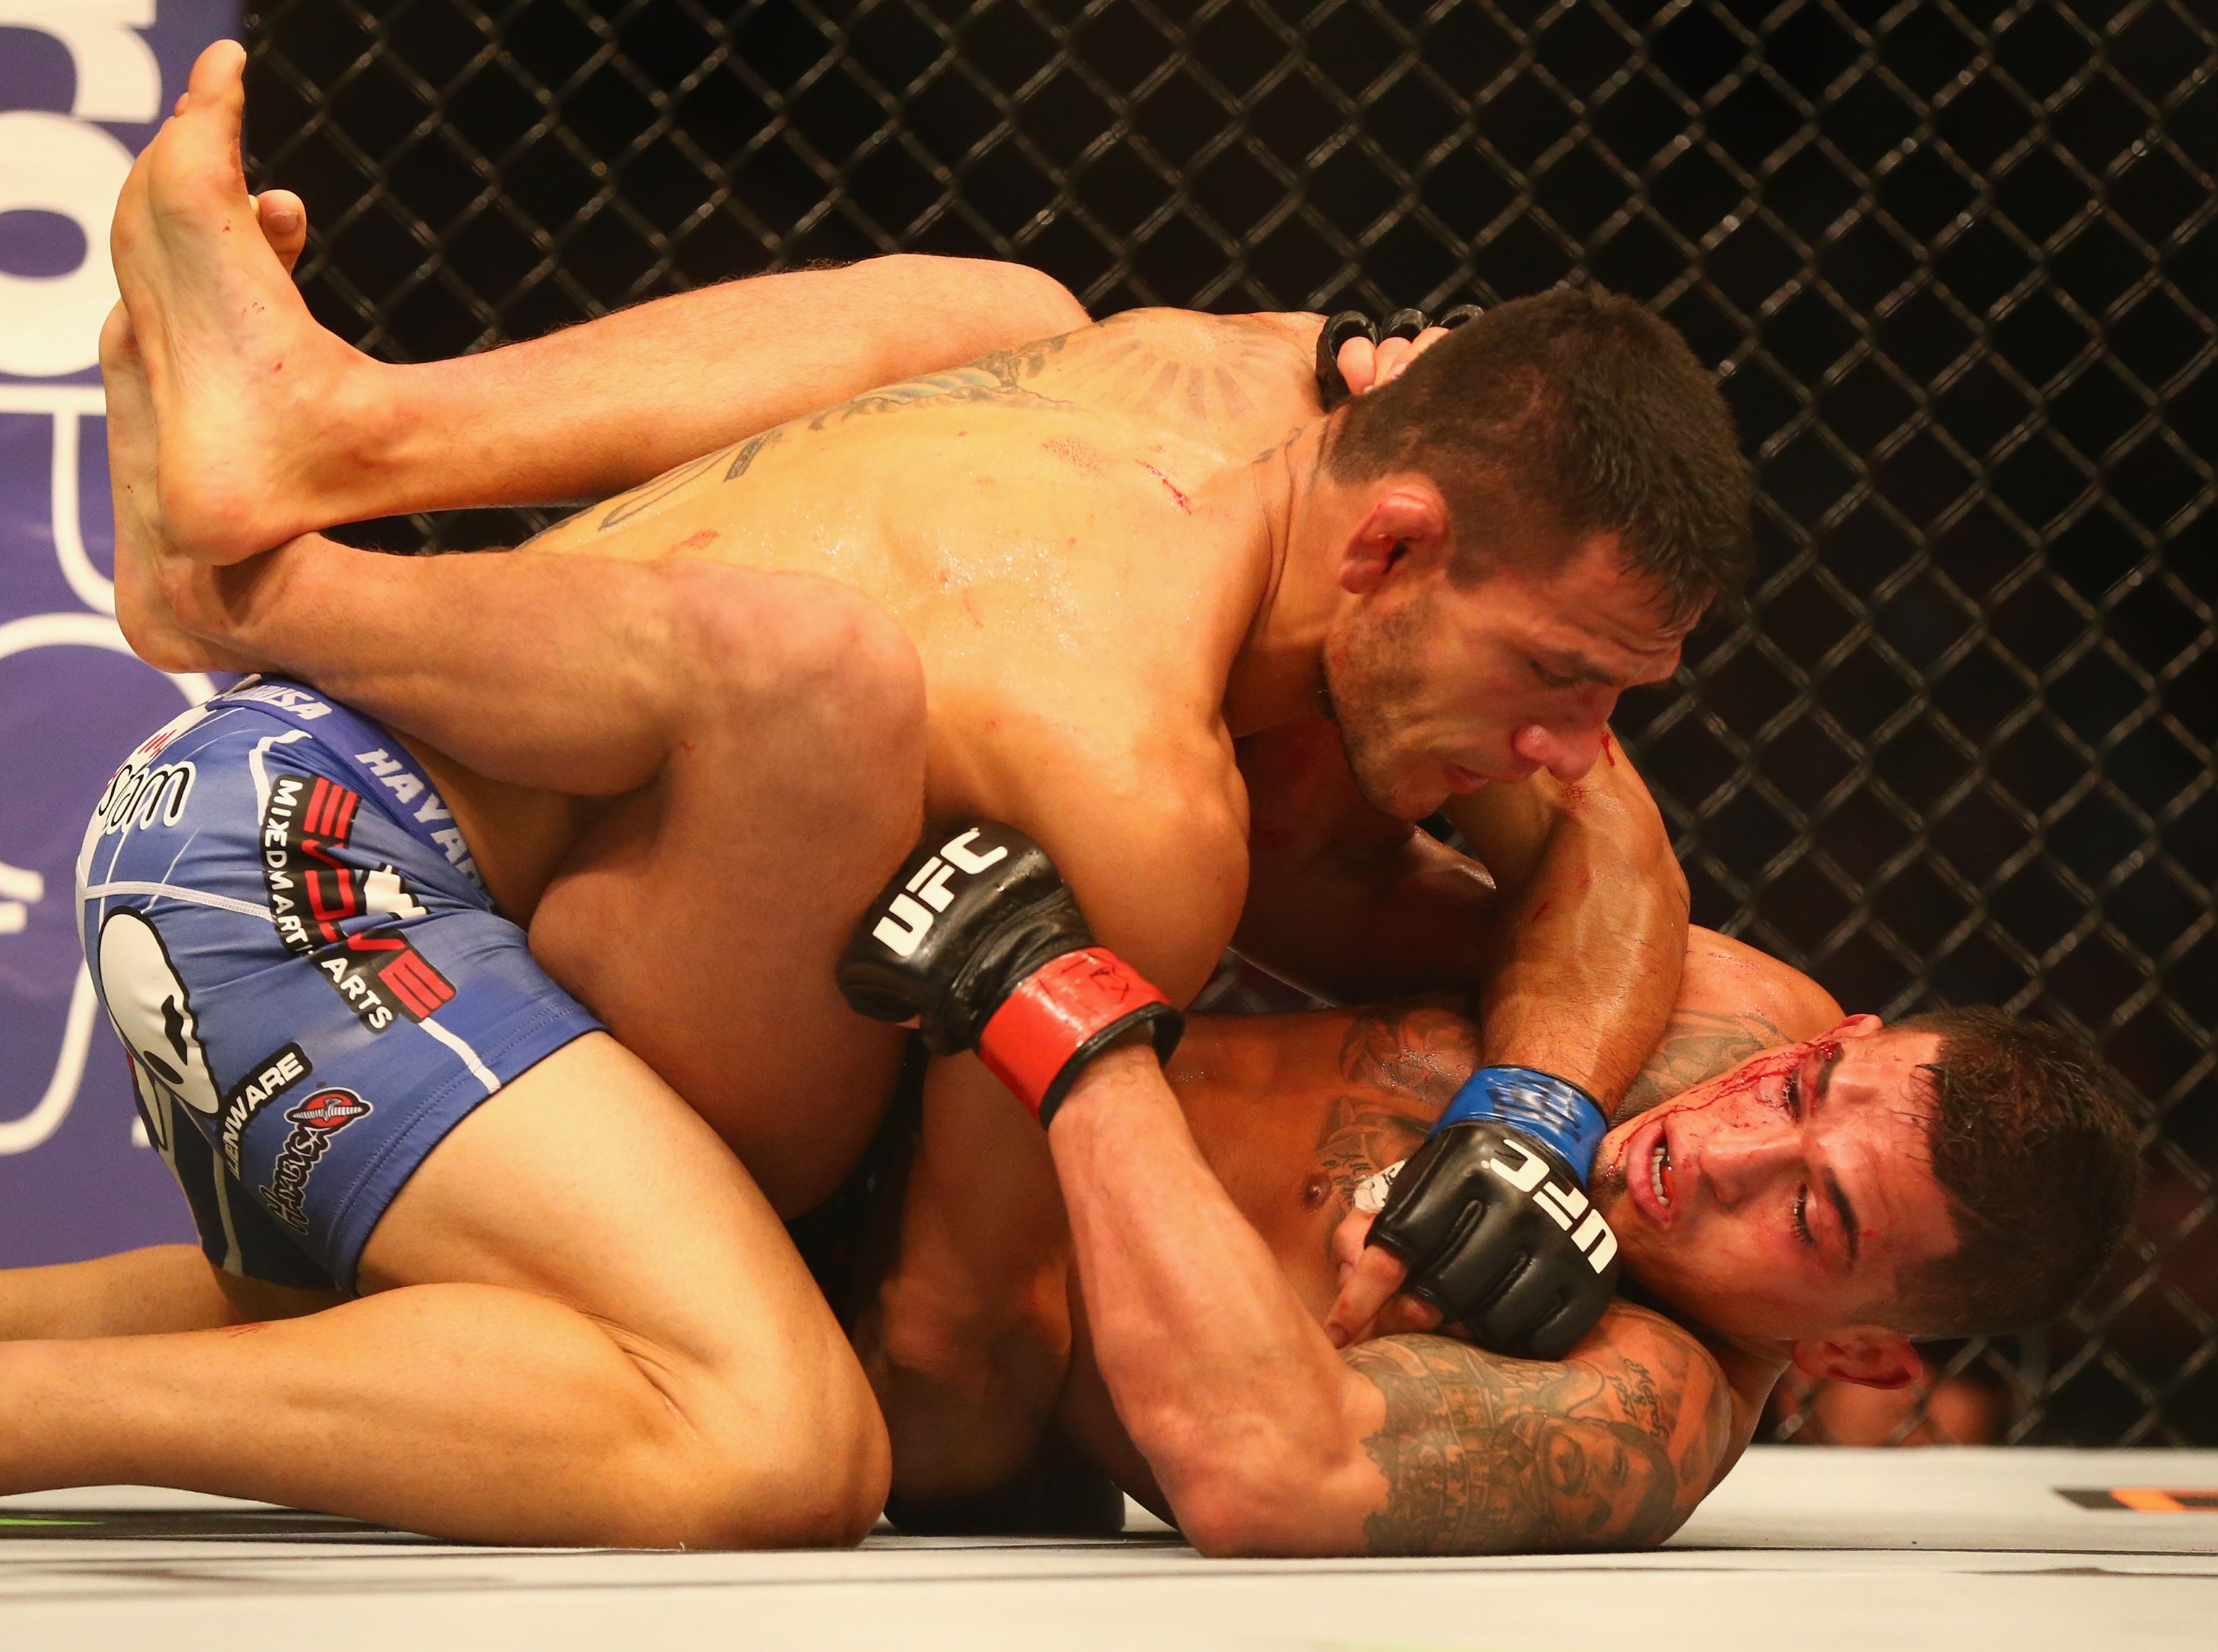 Rafael dos Anjos drops an elbow on Anthony Pettis Saturday en route to winning the lightweight title in the main event of UFC 185 in Dallas.  (Photo by Ronald Martinez/Getty Images)